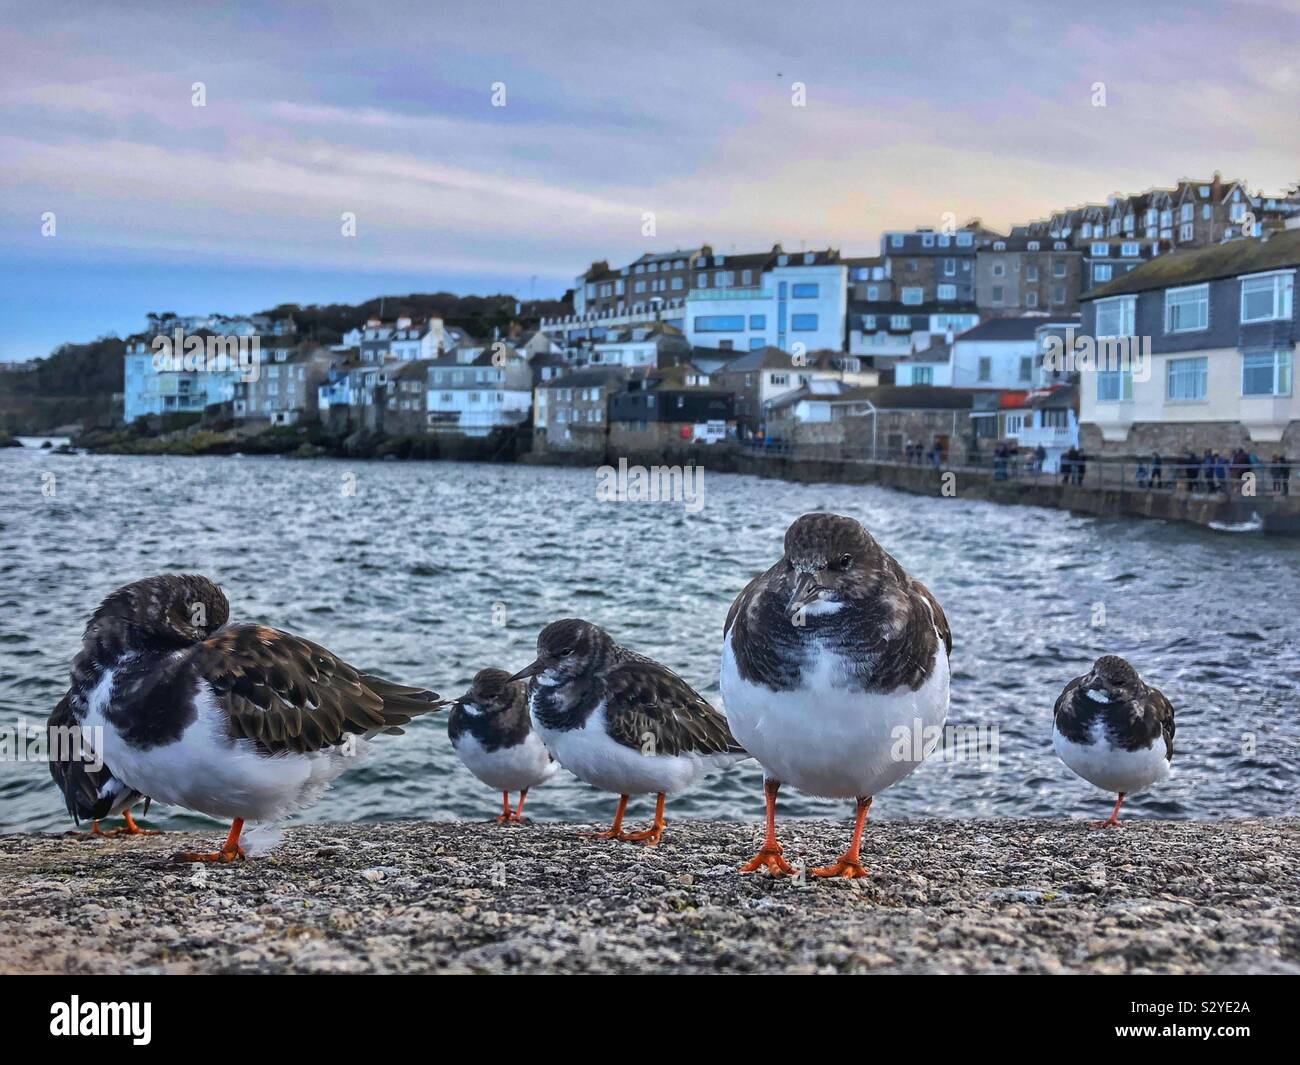 Turnstones (Arenaria interpres) roosting on the harbour wall at St Ives, Cornwall, England, October. Stock Photo